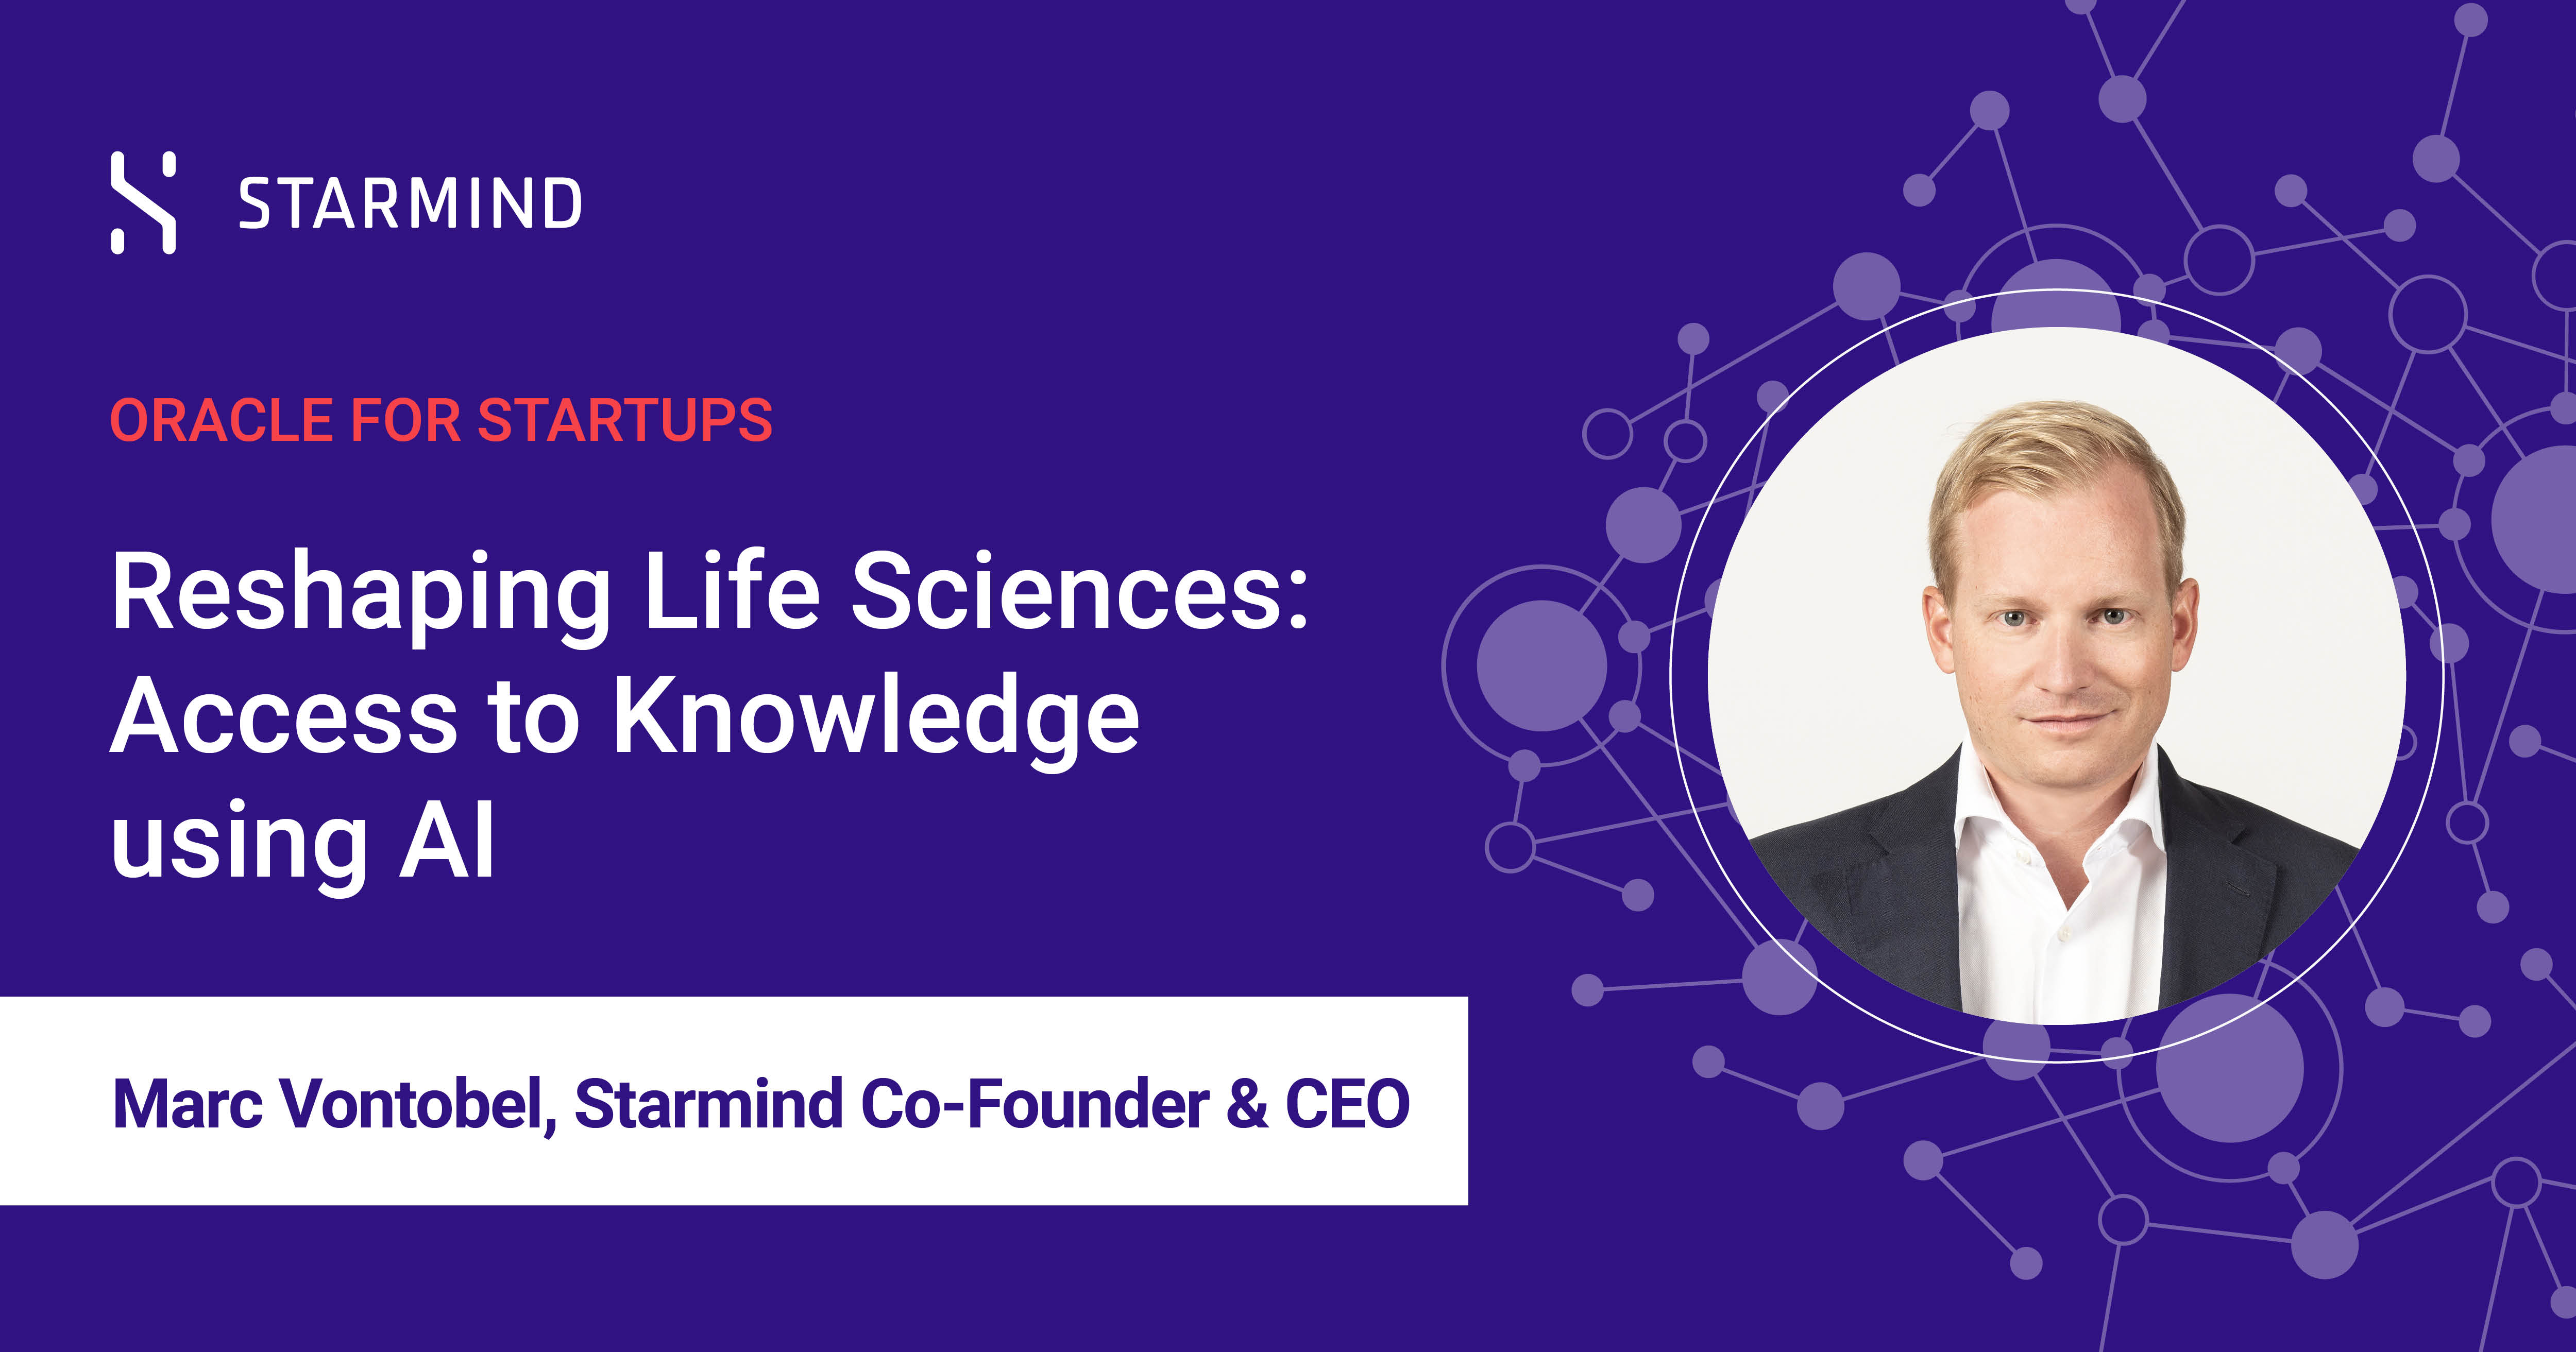 Meet the Startups: Life Sciences Disrupted